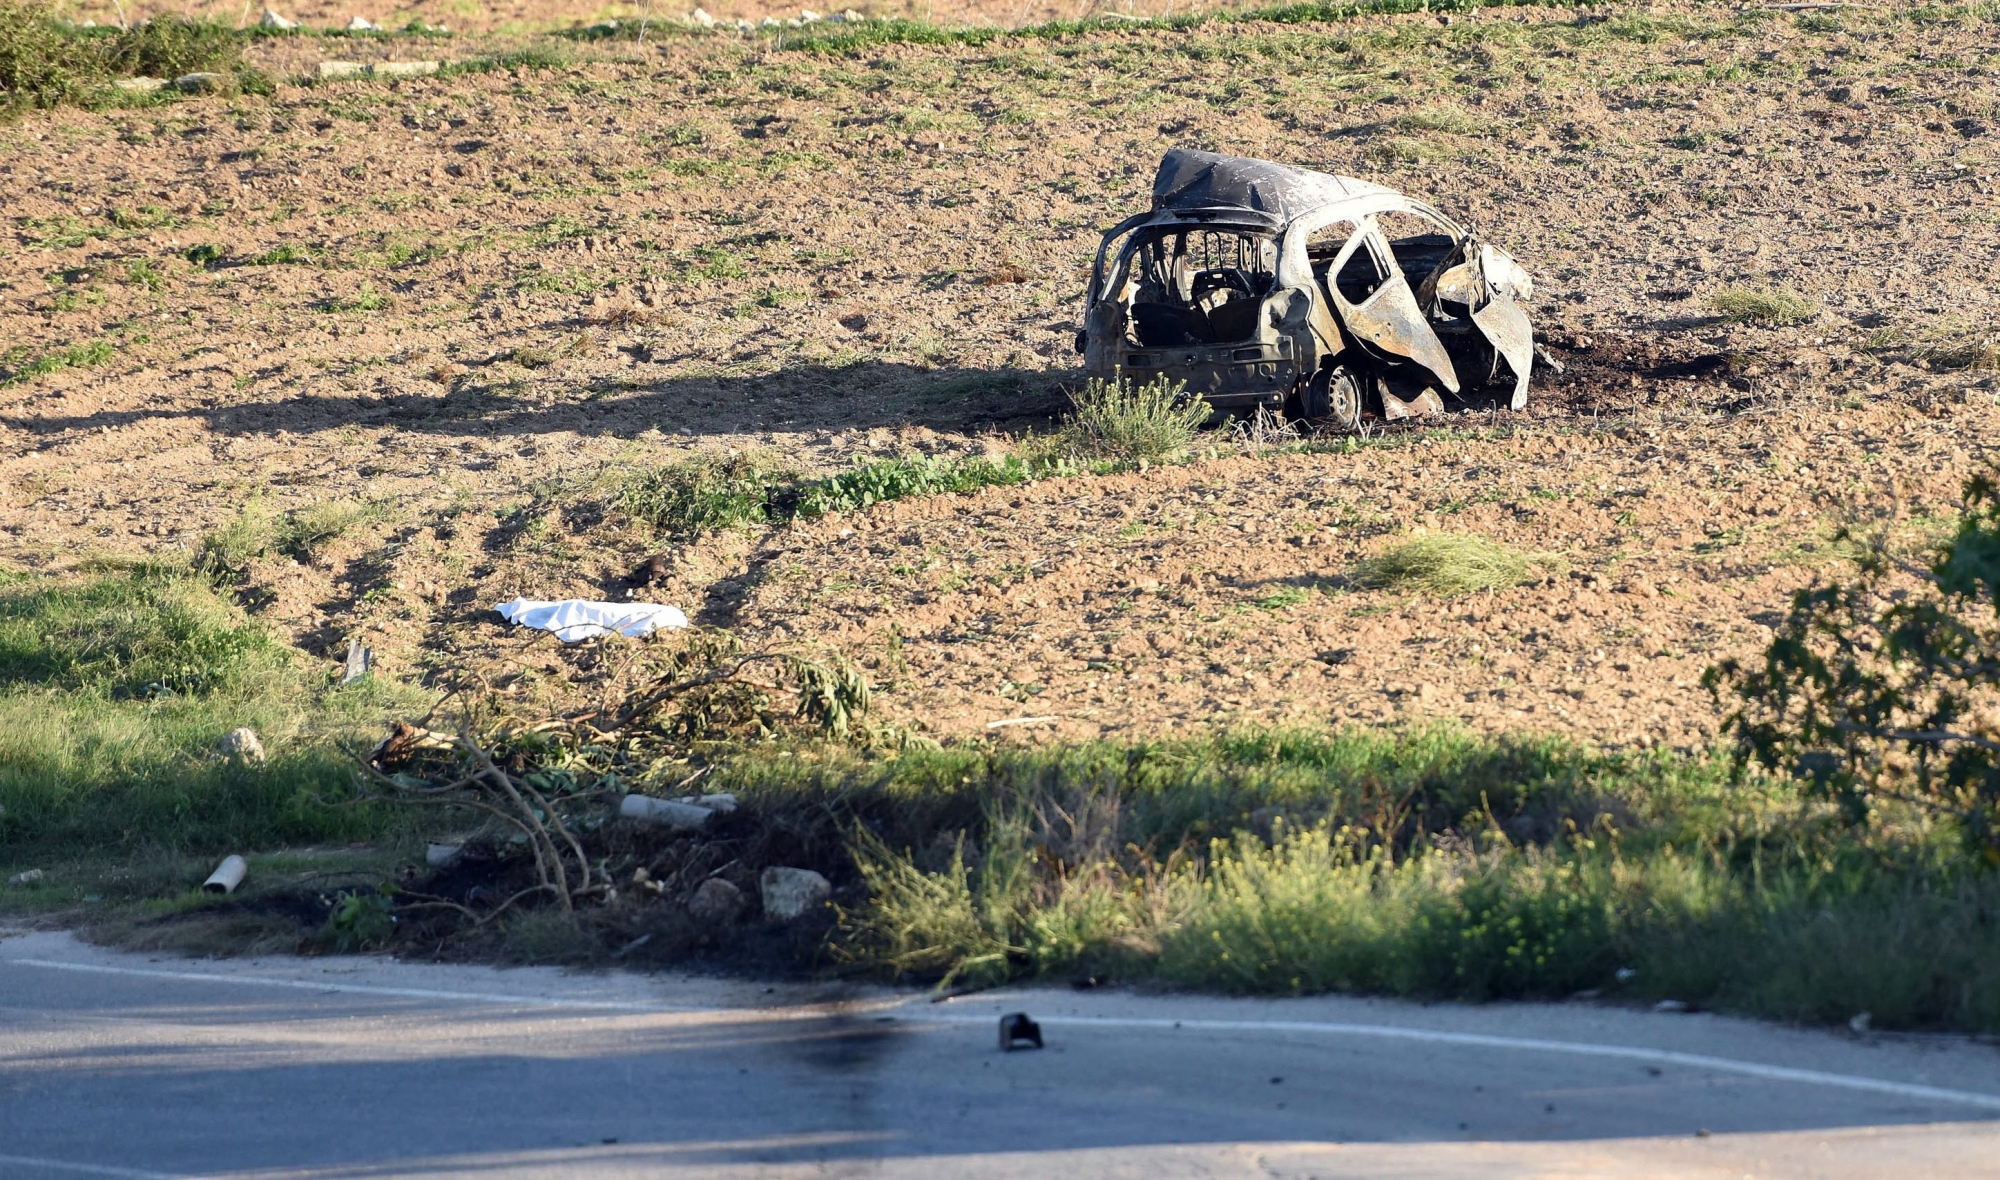 The wreckage of the car of investigative journalist Daphne Caruana Galizia lies next to a road in the town of Mosta, Malta, Monday, Oct. 16, 2017. Malta's prime minister says a car bomb has killed an investigative journalist on the island nation. Prime Minister Joseph Muscat said the bomb that killed reporter Daphne Caruana Galizia exploded Monday afternoon as she left her home in a town outside Malta's capital, Valetta. (AP Photo/Rene Rossignaud) Malta Journalist Killed